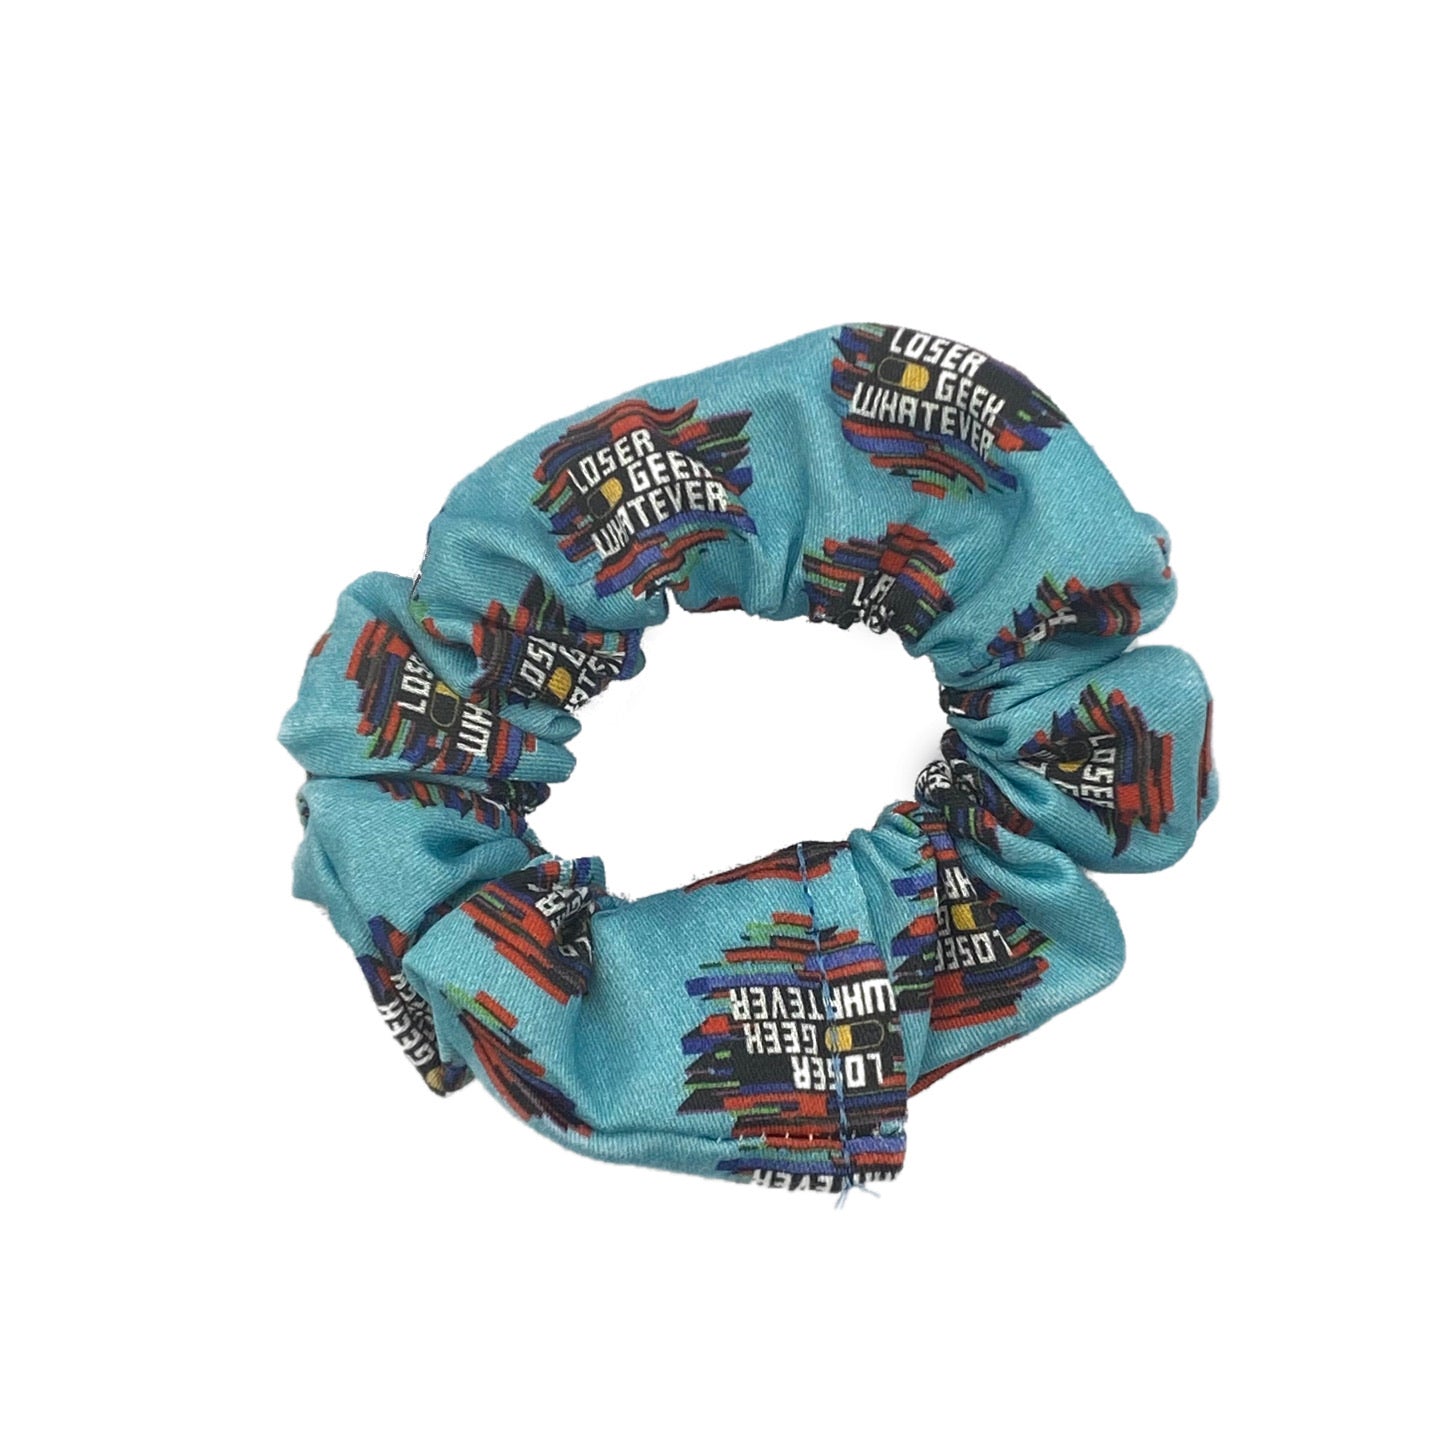 Loser Geek Whatever Scrunchie- Inspired by Be More Chill